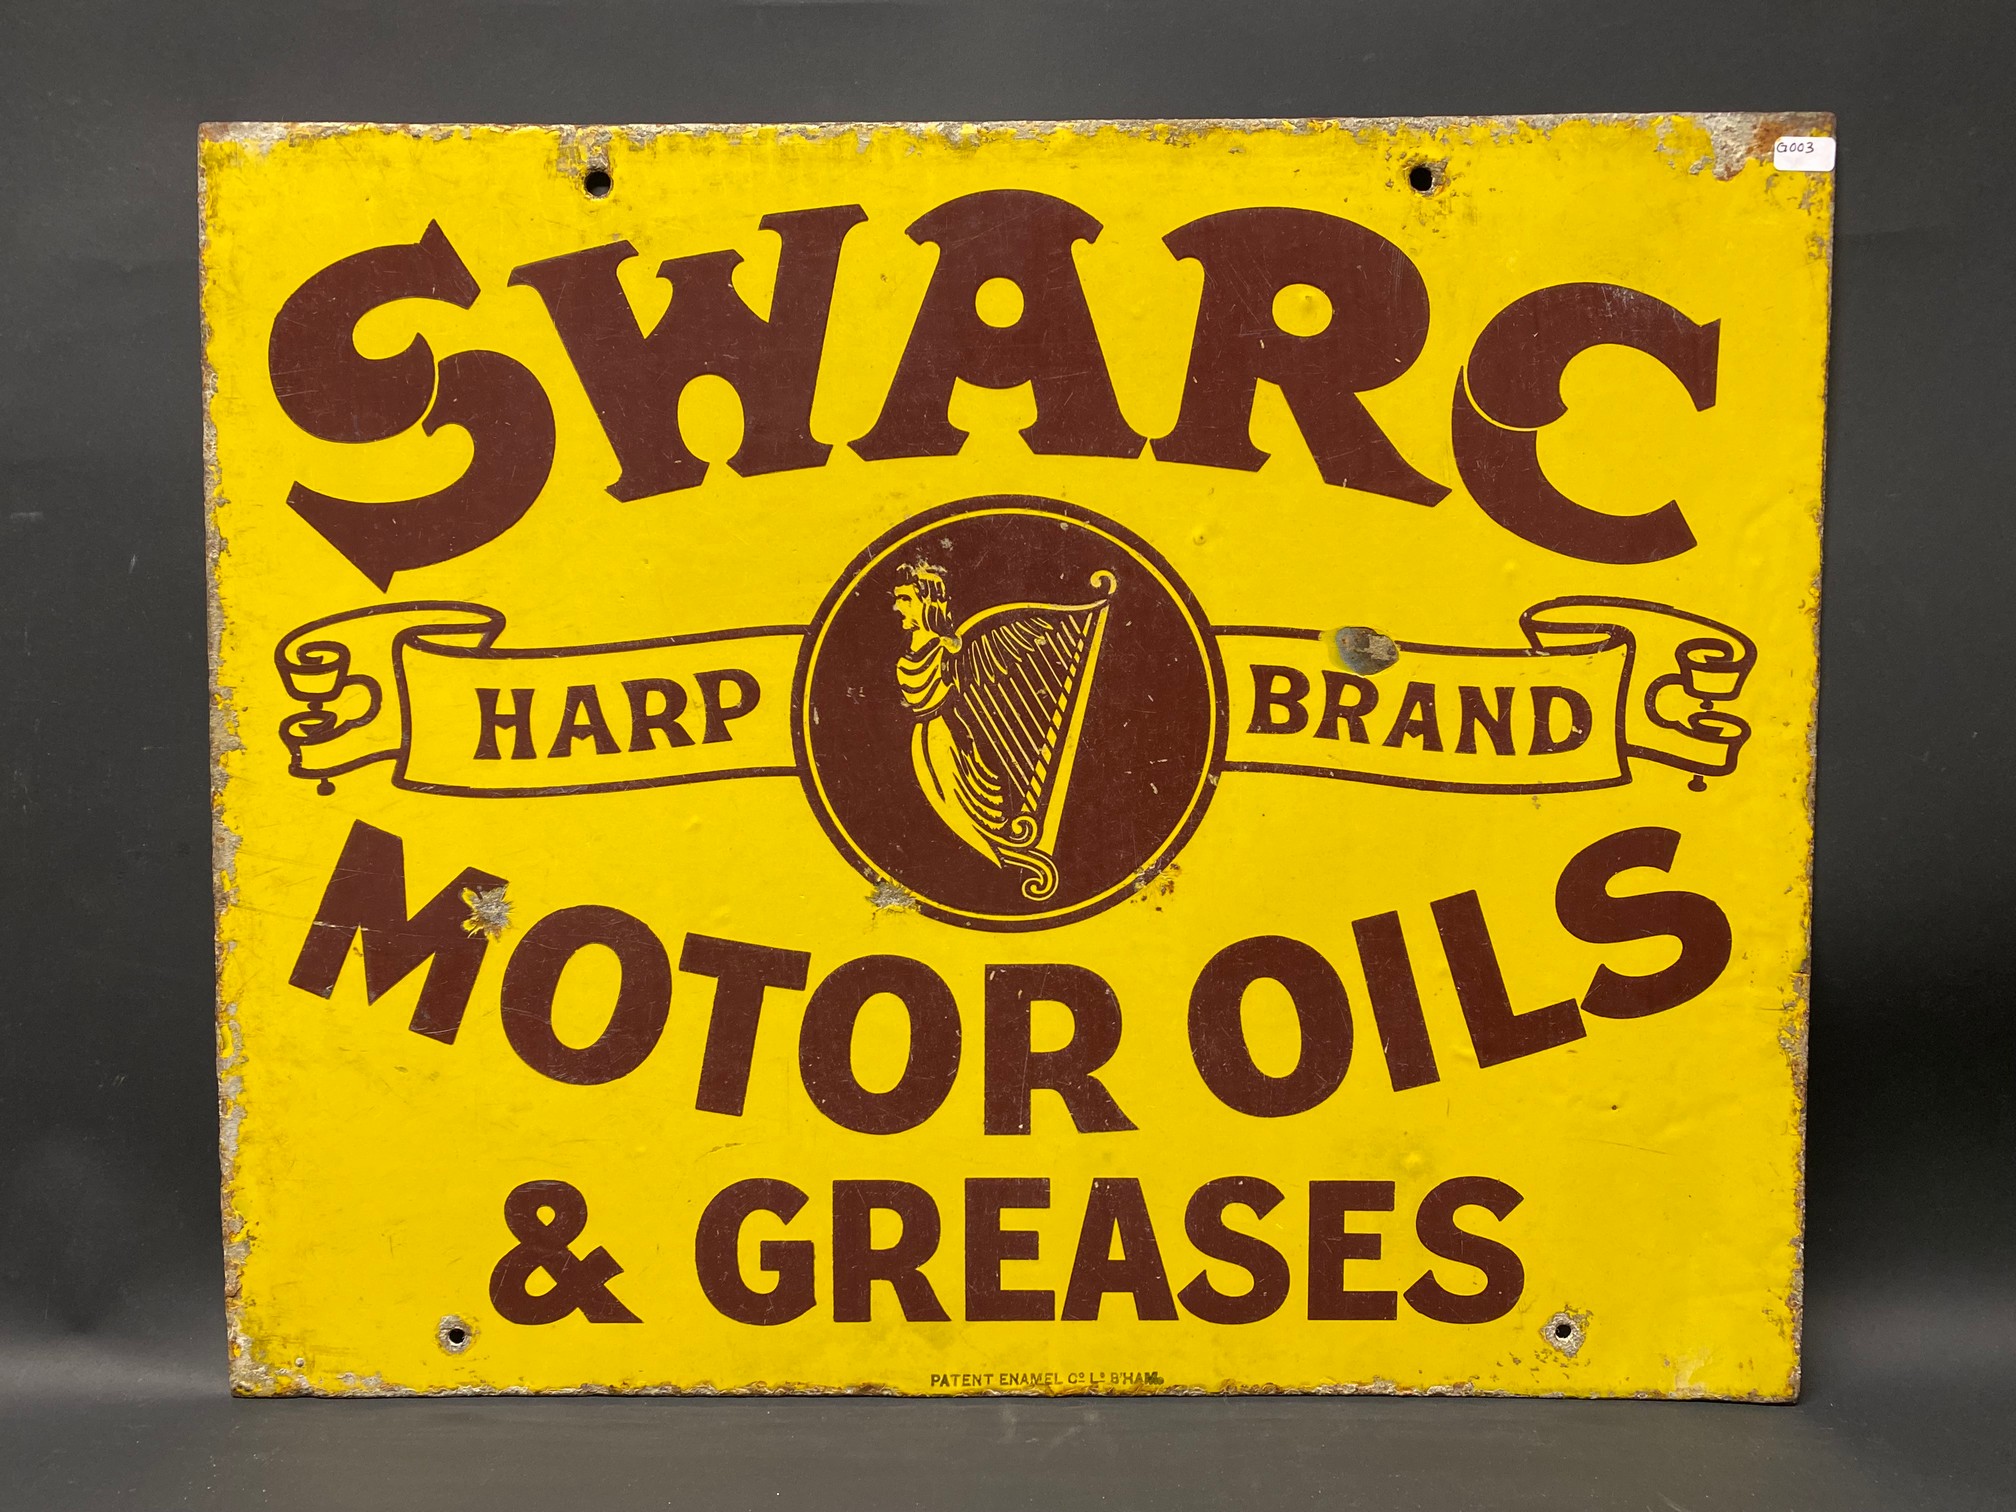 A SWARC Harp Brand Motor Oils and Greases double sided enamel sign, 20 x 16". - Image 5 of 6